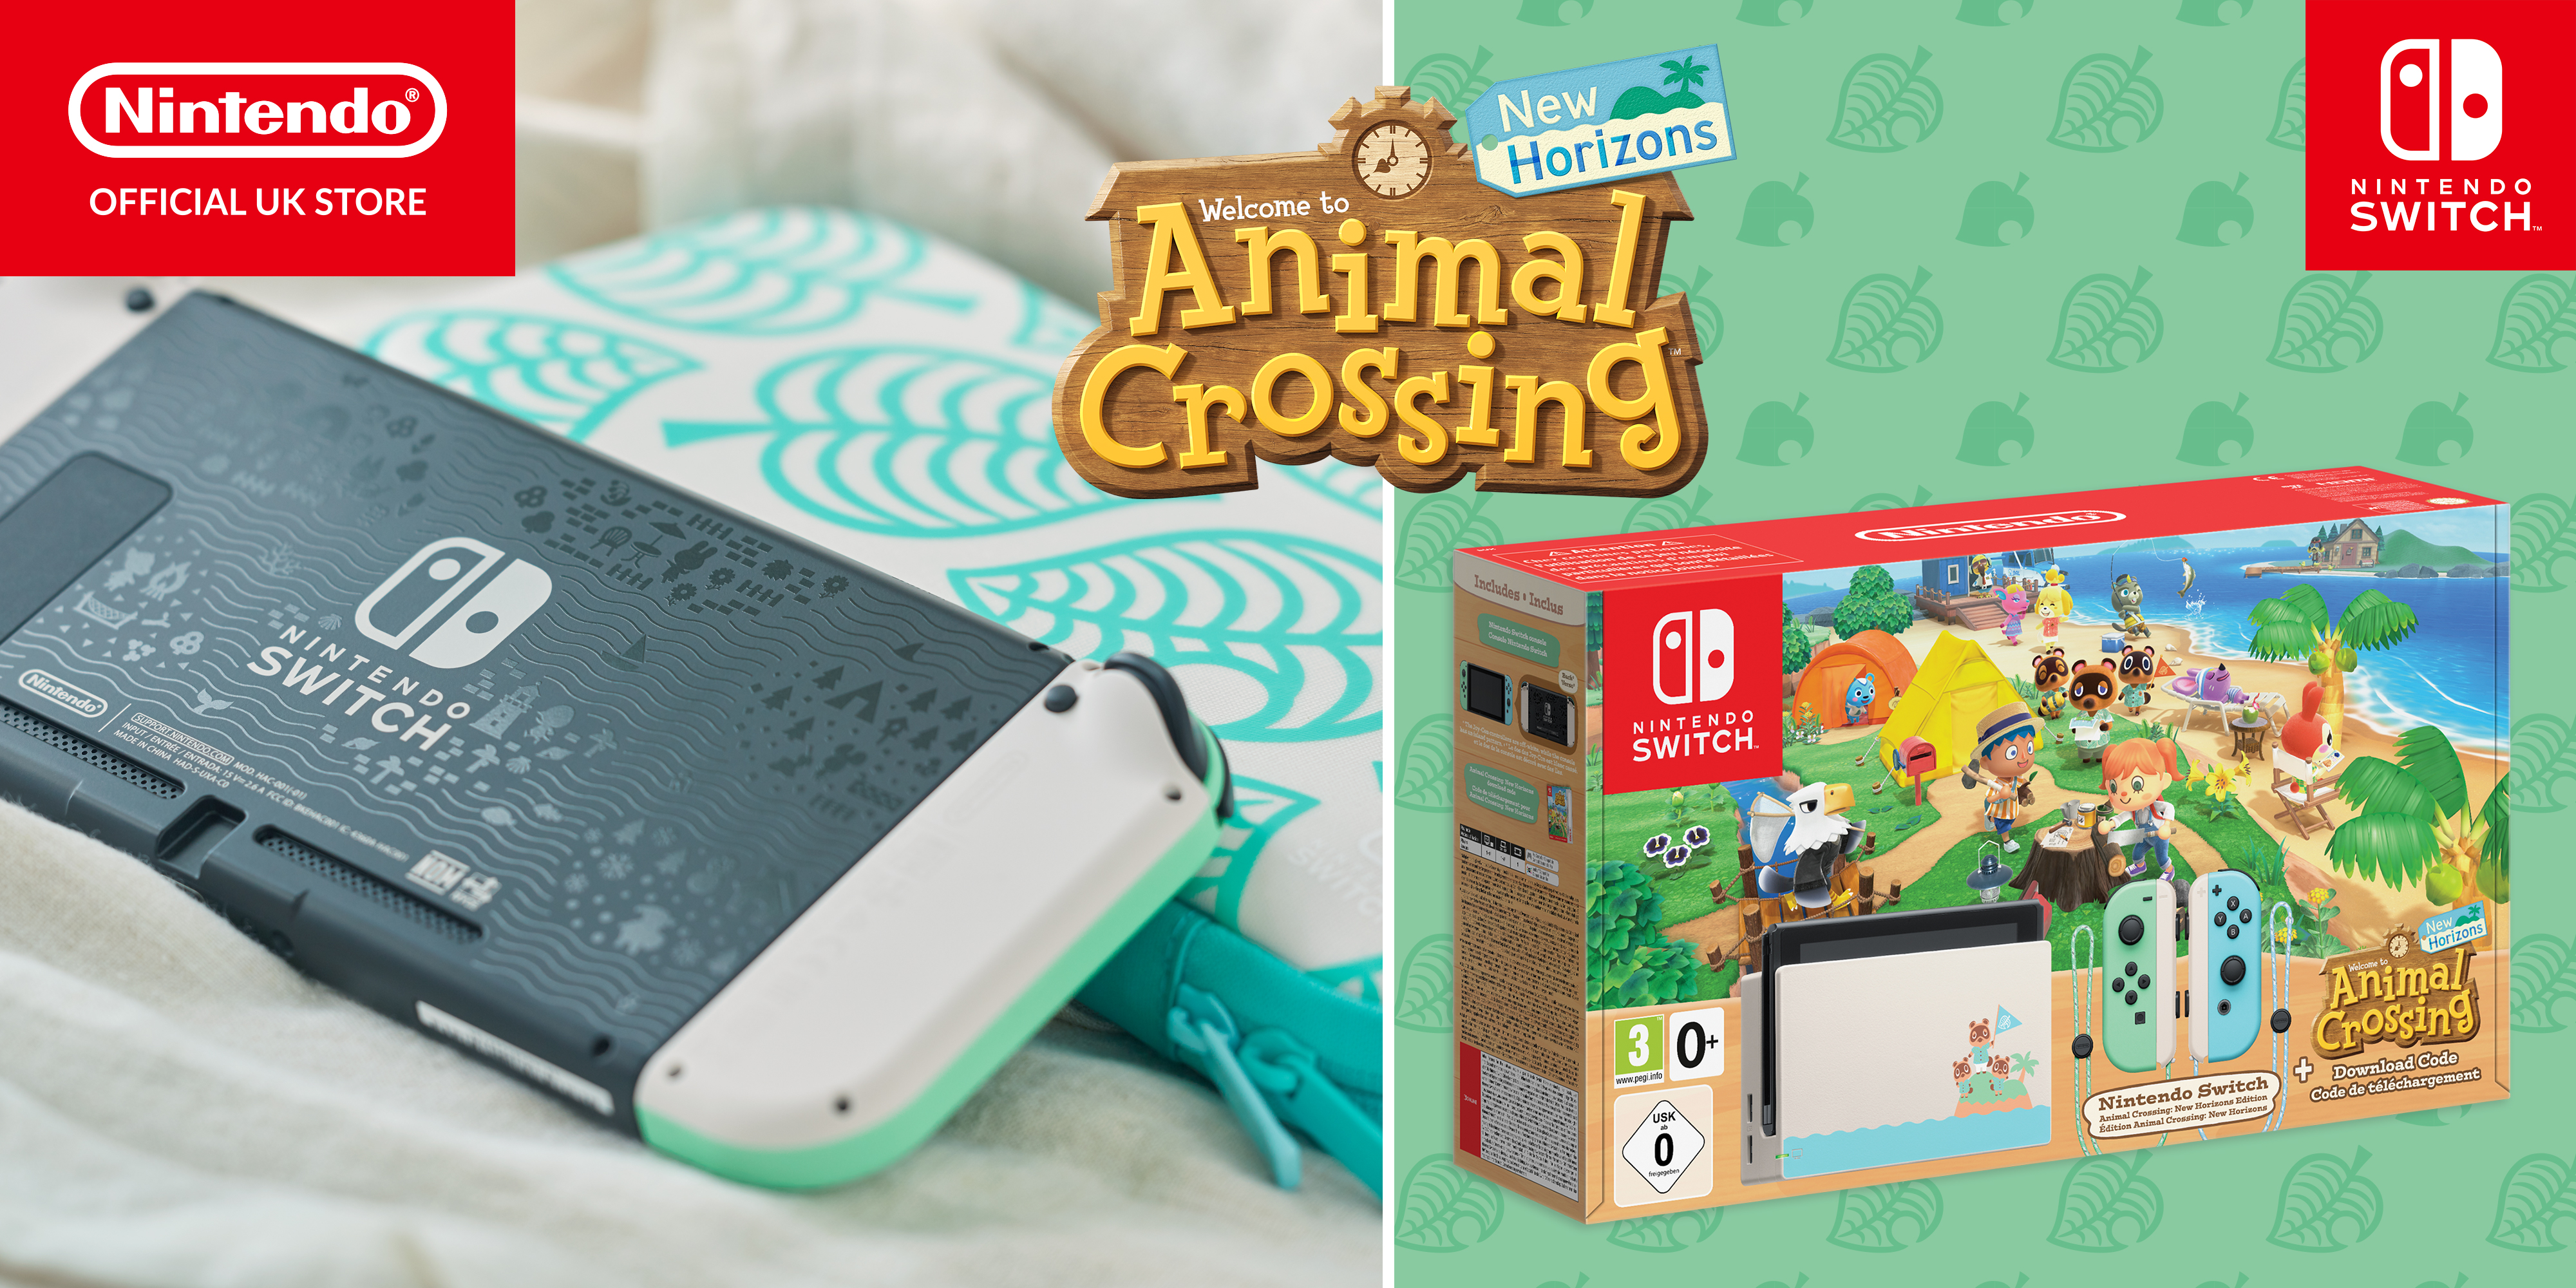 Nintendo Switch Animal Crossing: New Horizons Edition now available to  pre-order at the Nintendo Official UK Store! | News | Nintendo